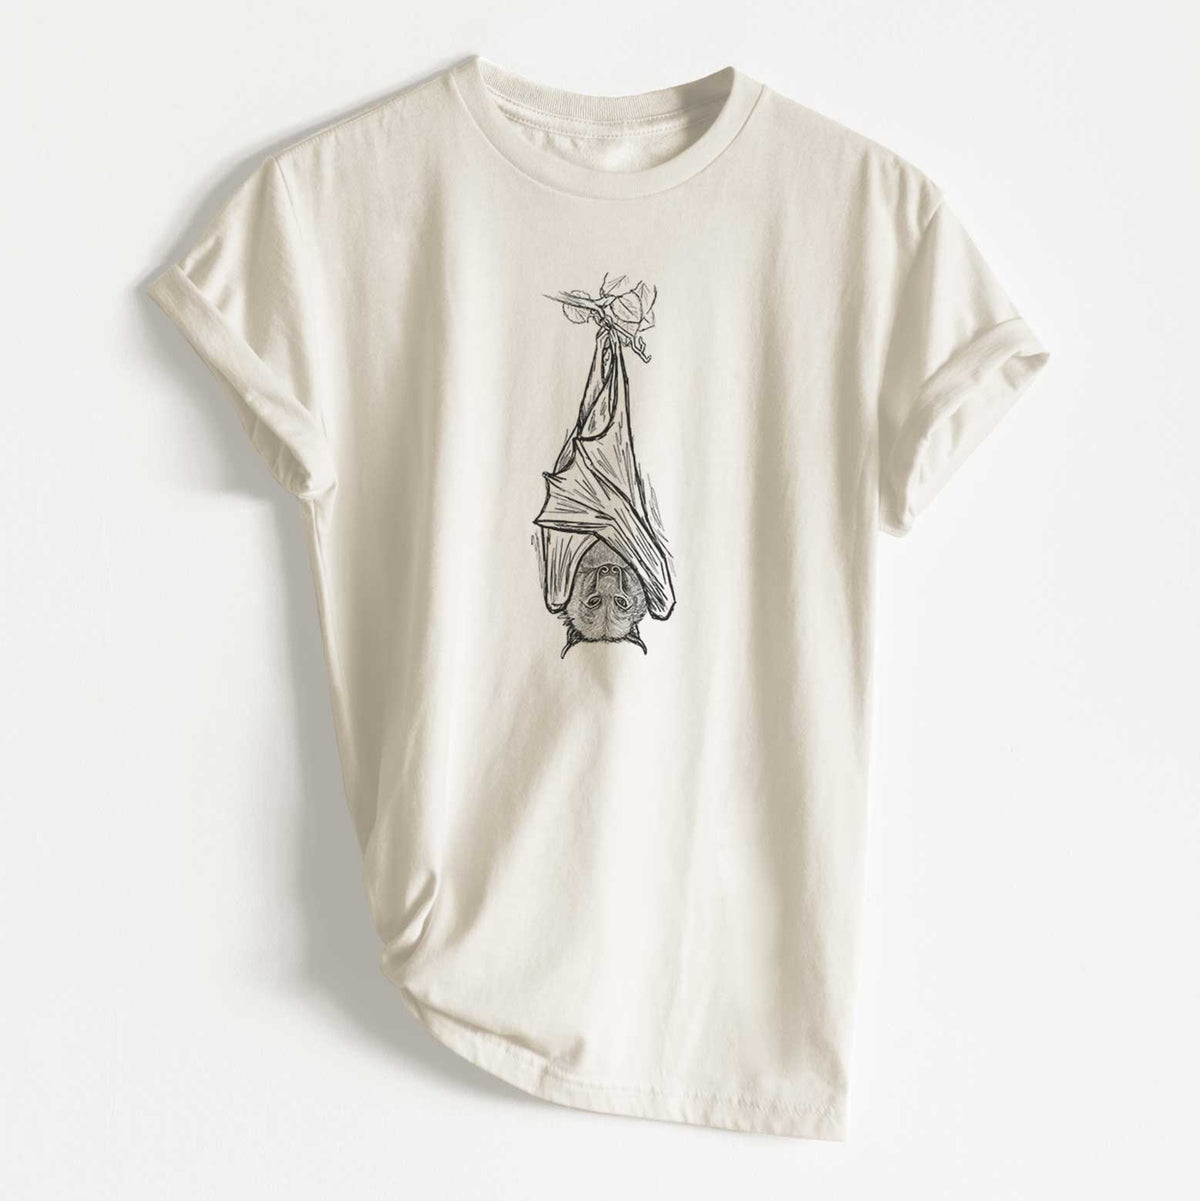 Pteropus vampyrus - Large Flying Fox - Unisex Recycled Eco Tee  - CLOSEOUT - FINAL SALE